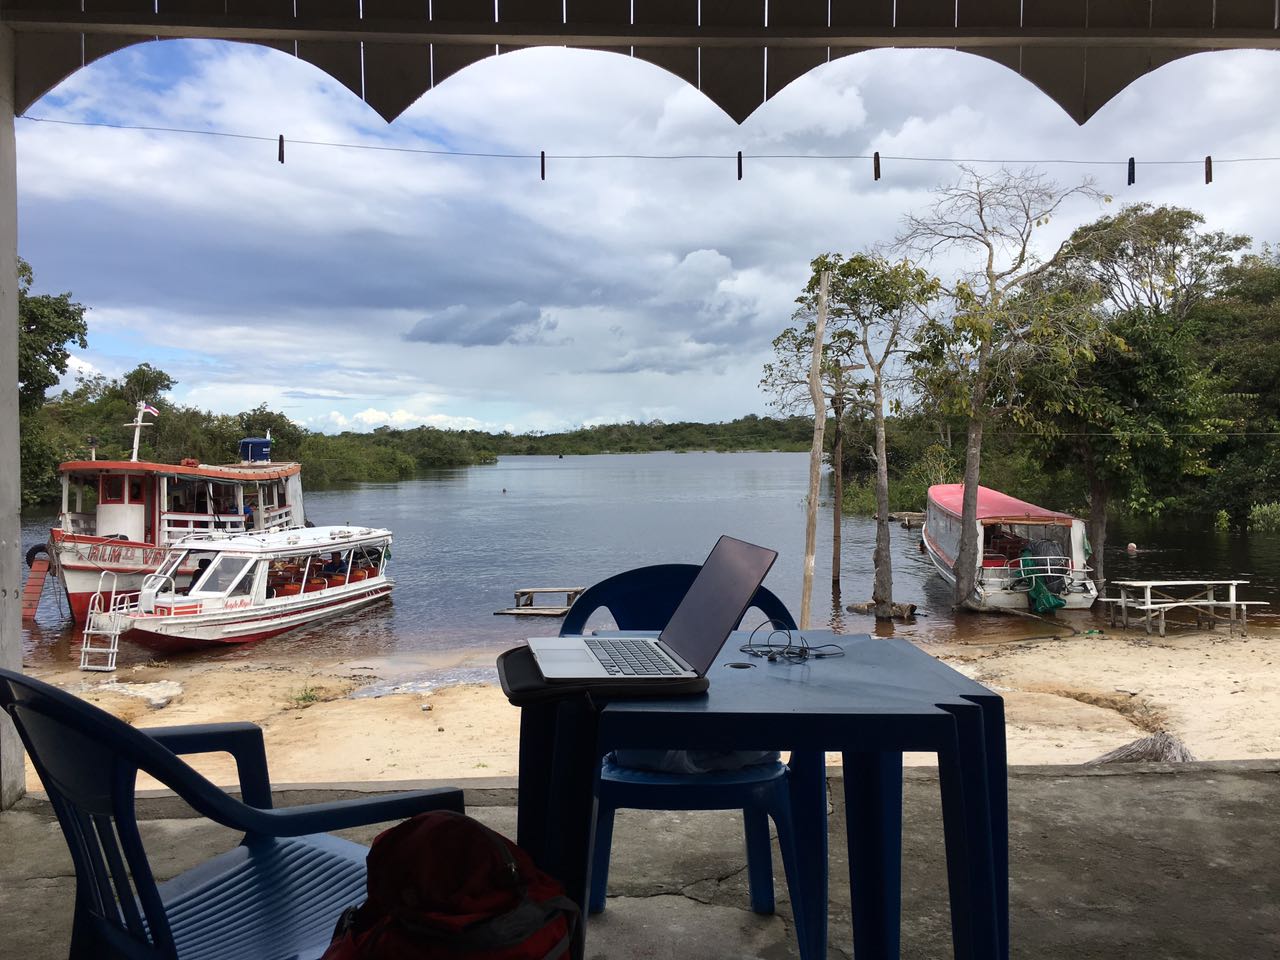 Mobile office in the Amazon. 